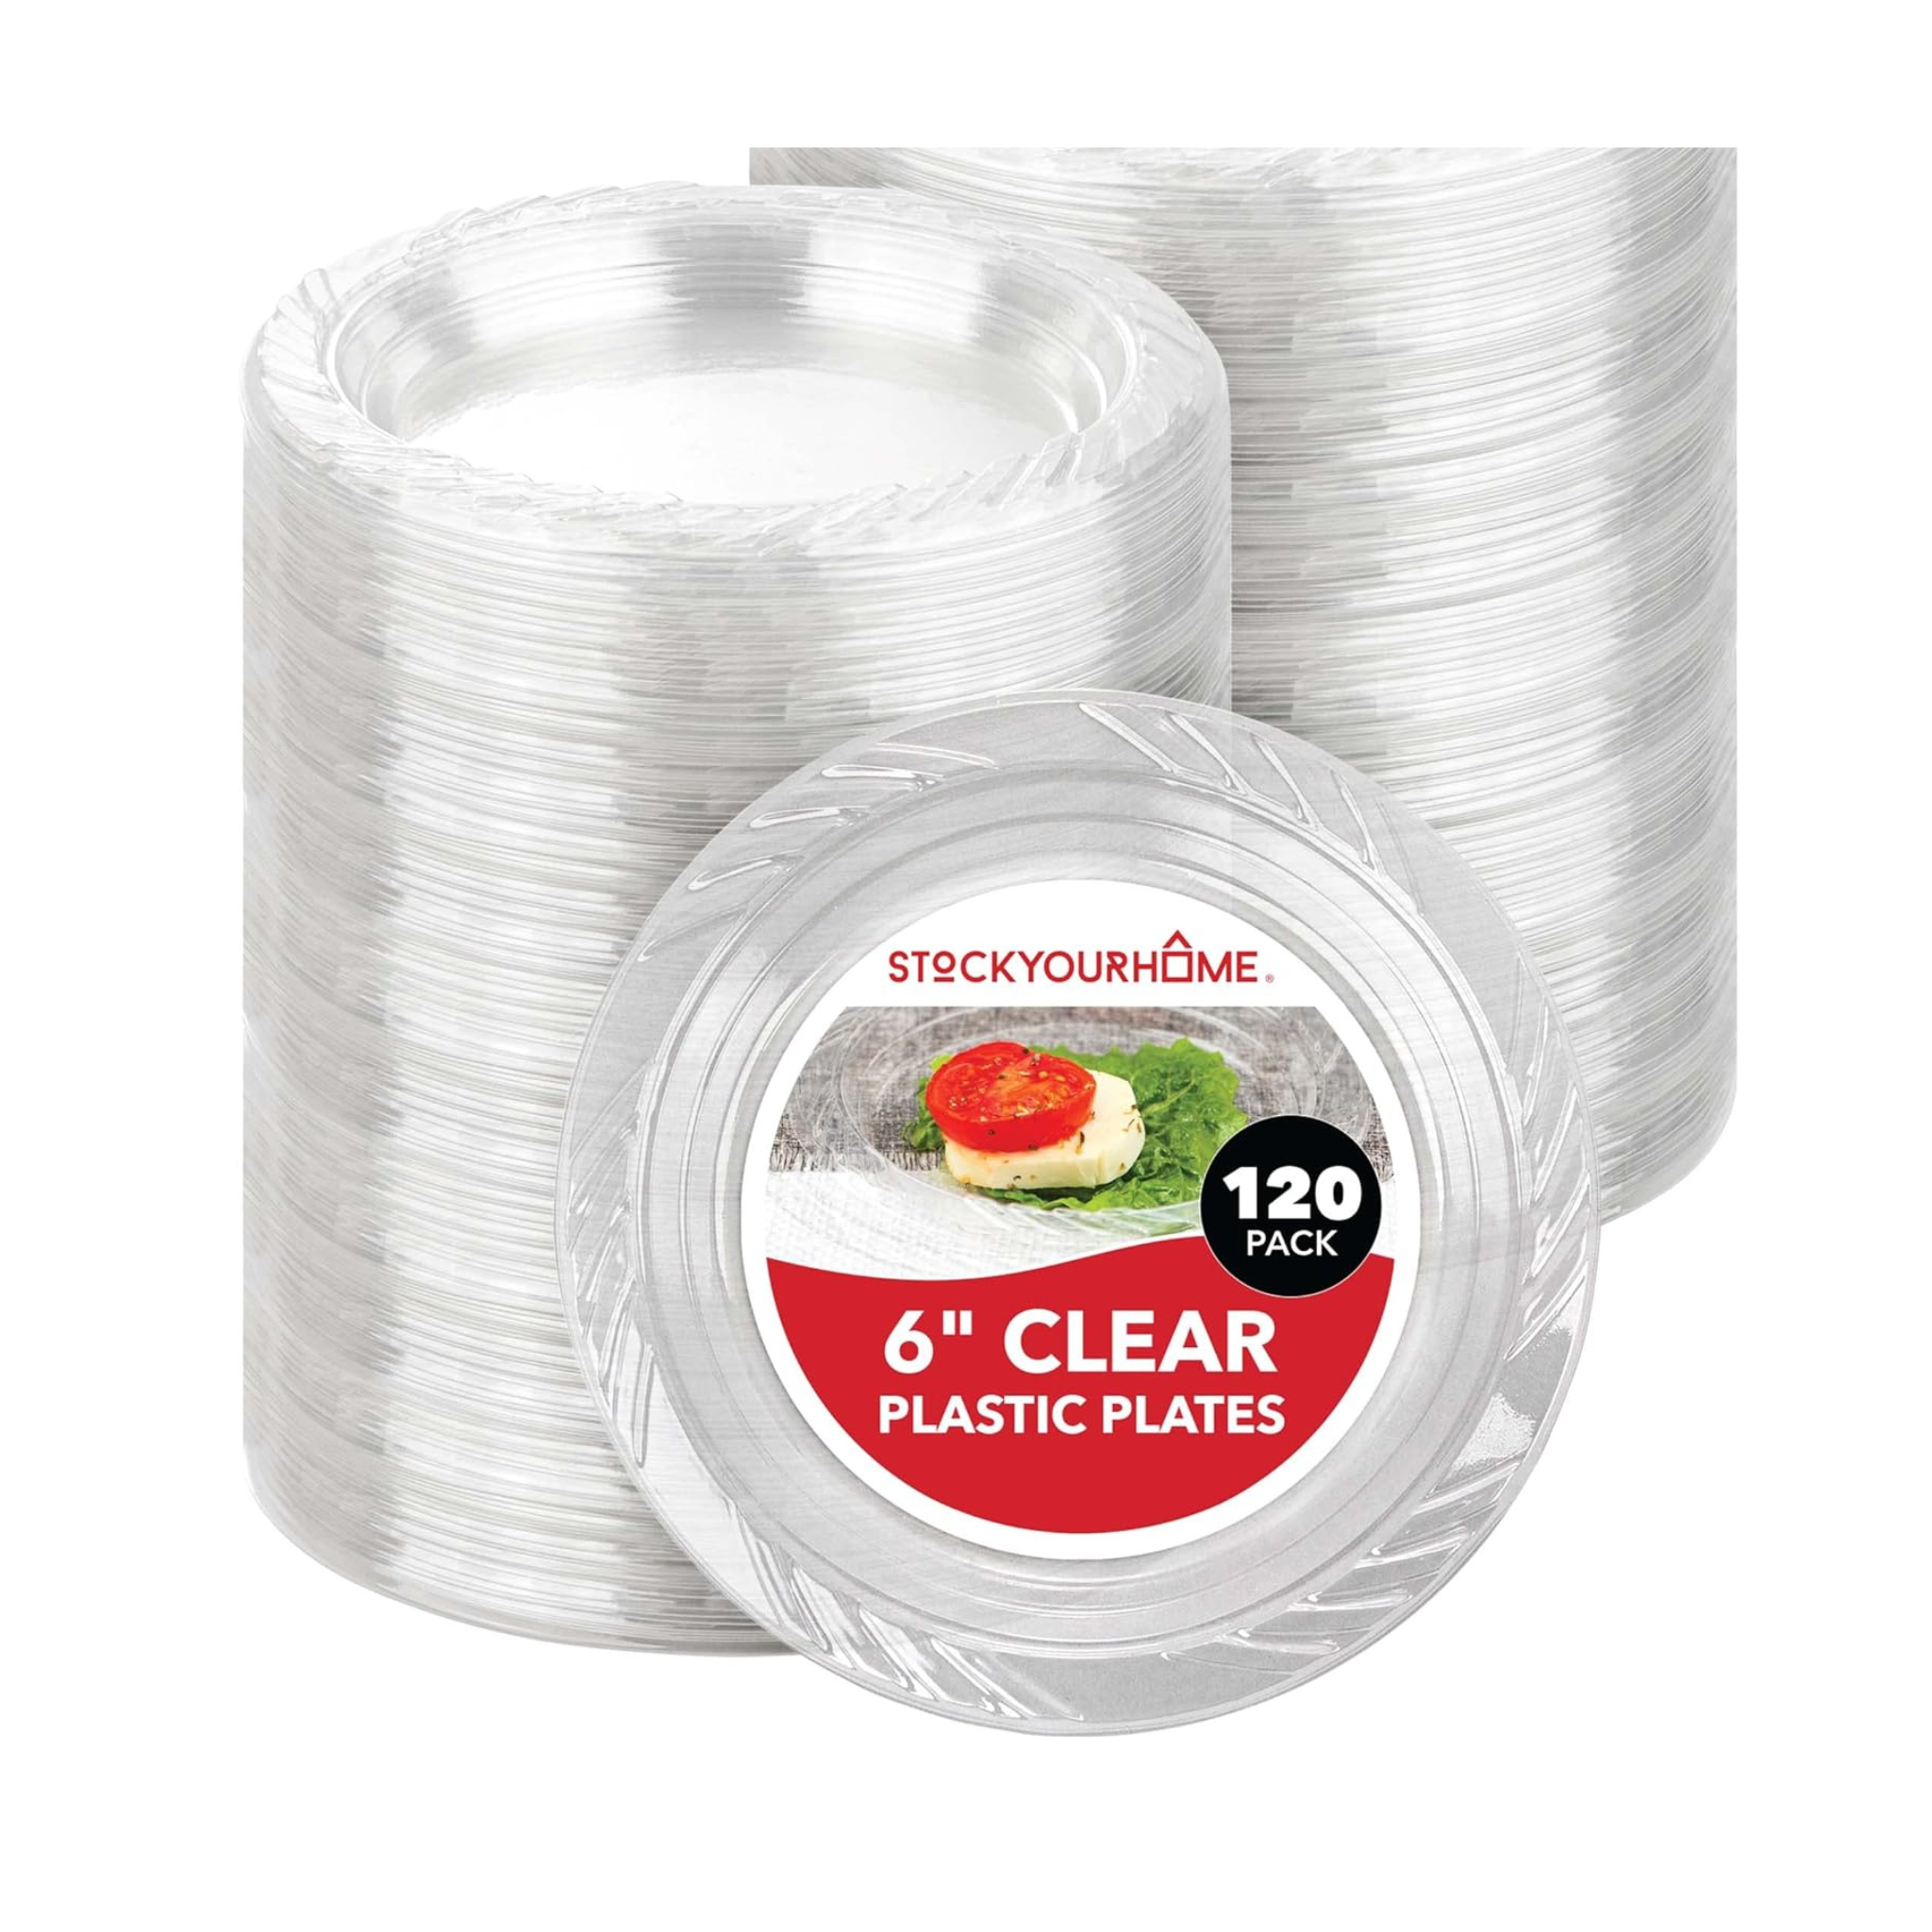 6" Clear Plastic Plates, 120 Pack